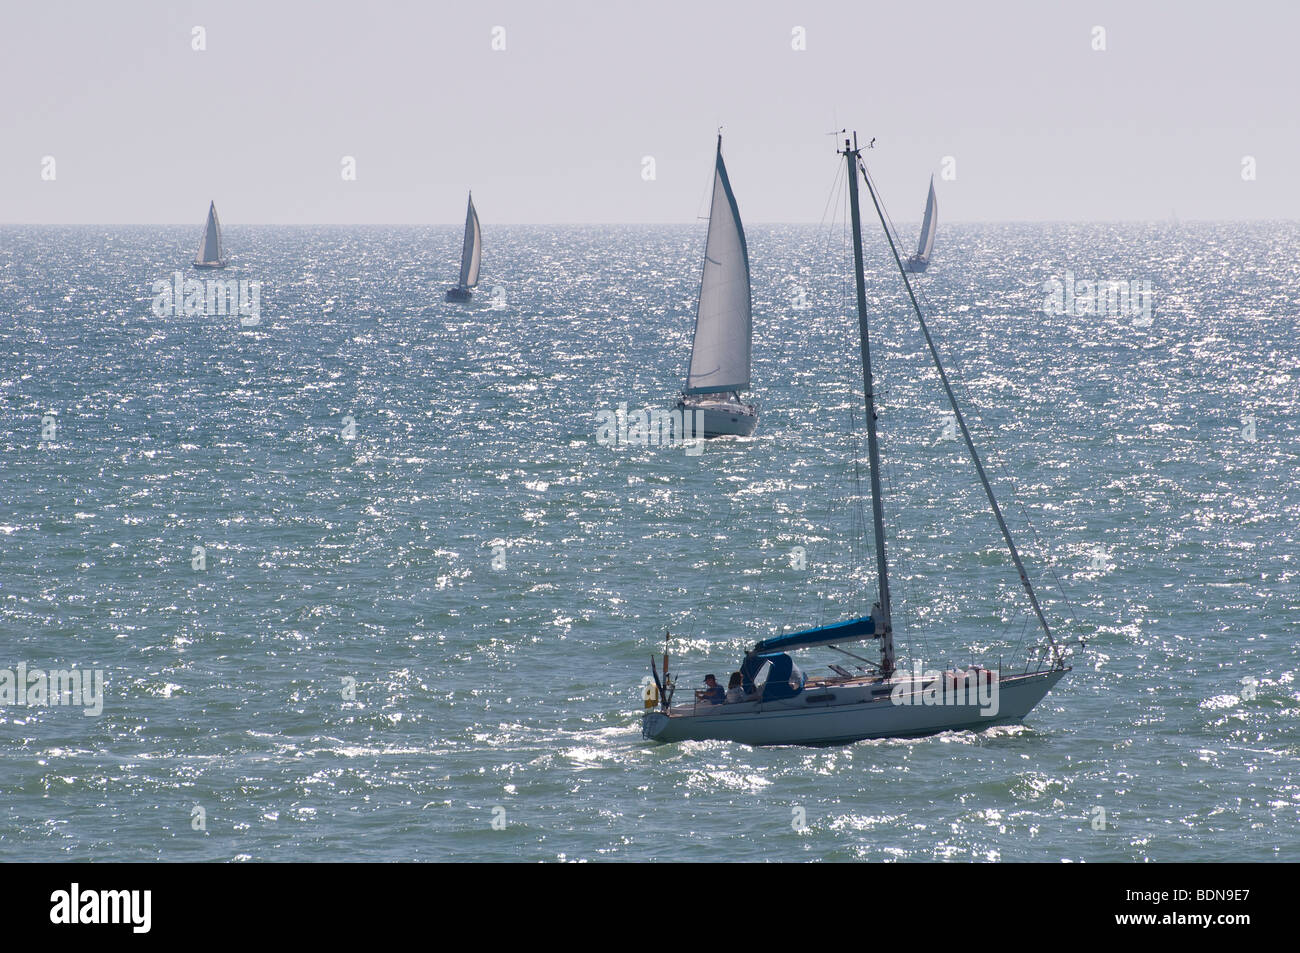 Sailing yachts in the sea by Brighton Marina in East Sussex, England. Stock Photo